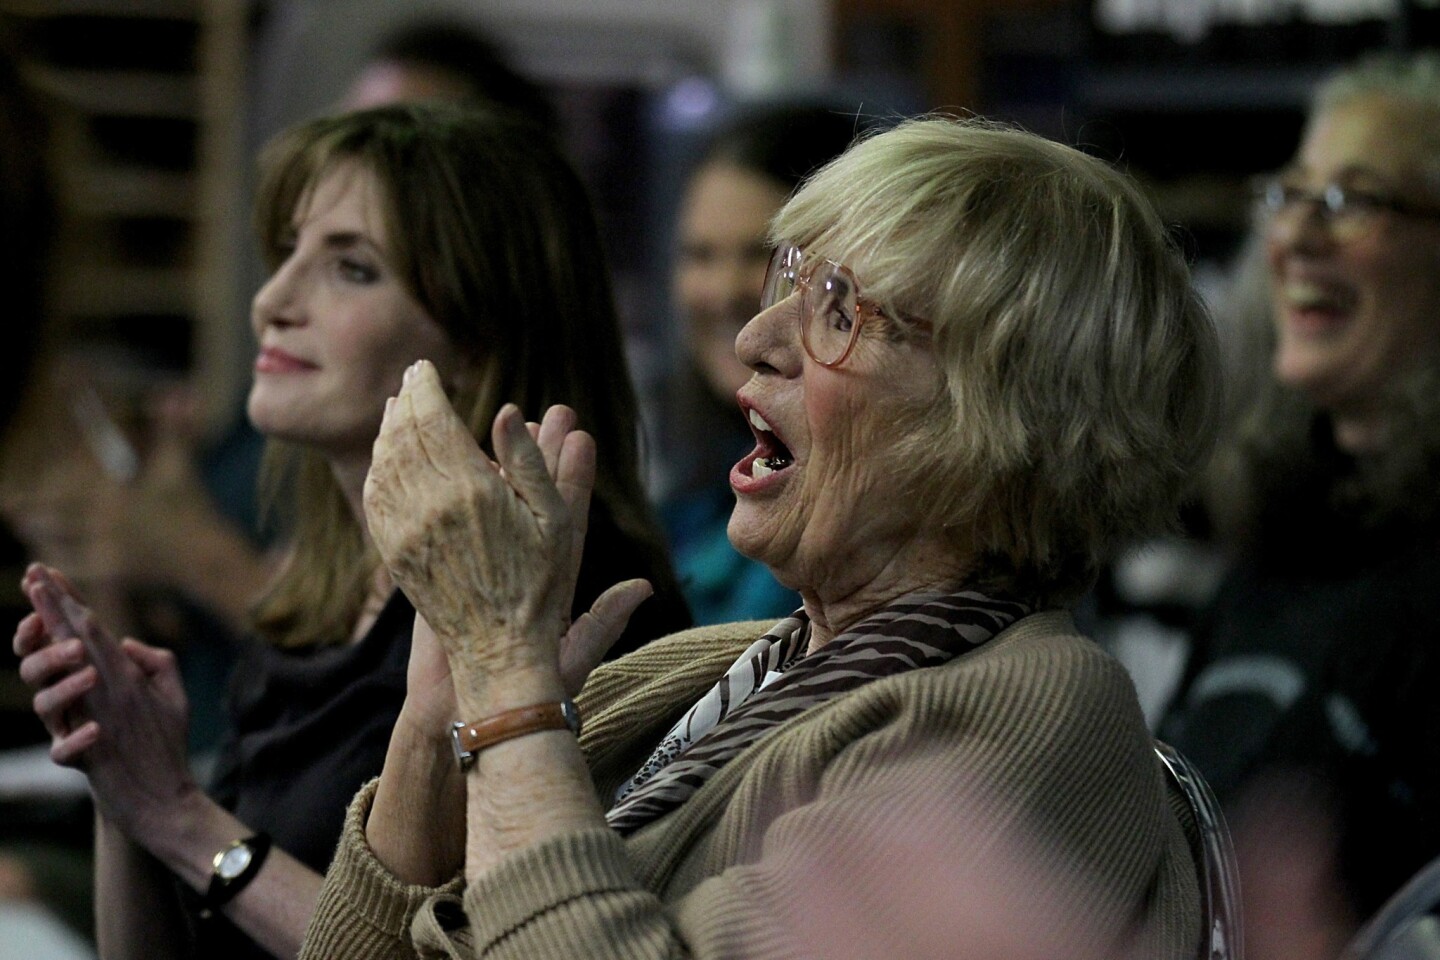 Instructor Karen Morrow applauds a student performance during one of her weekly singing workshops at the Westwood Presbyterian Church in Westwood on Monday, Mar. 24, 2014.